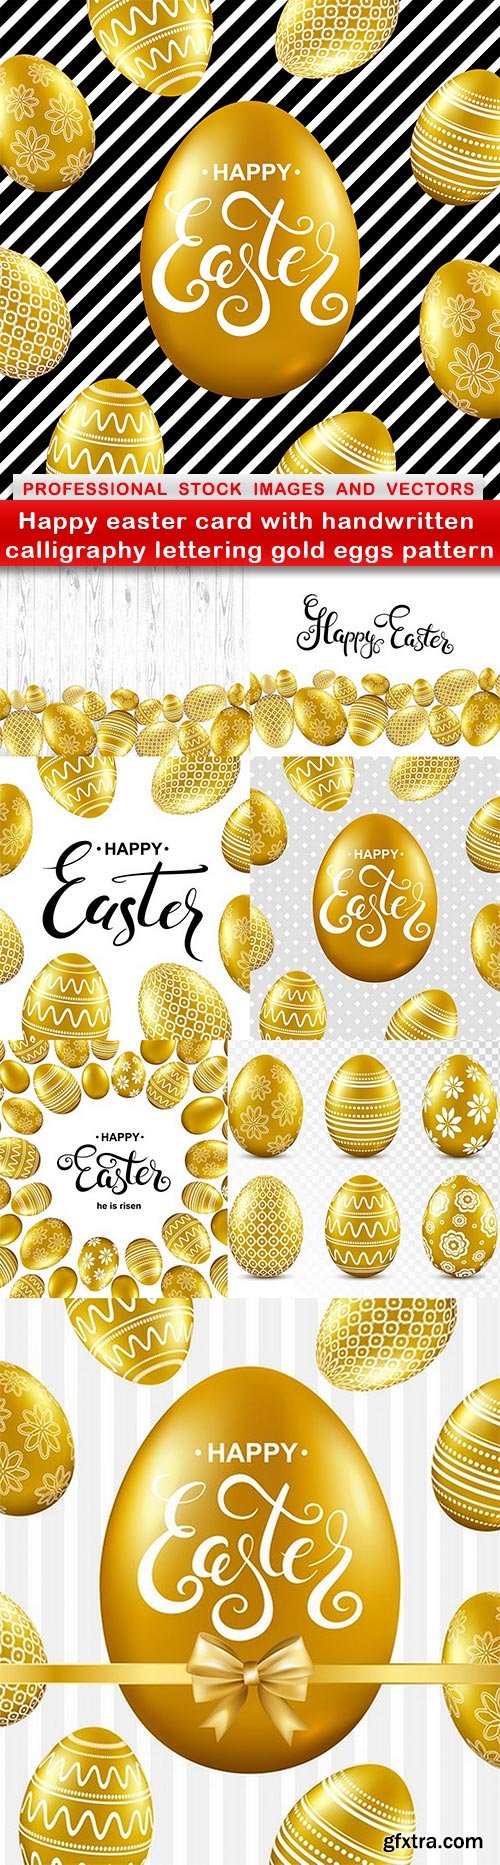 Happy easter card with handwritten calligraphy lettering gold eggs pattern - 8 EPS